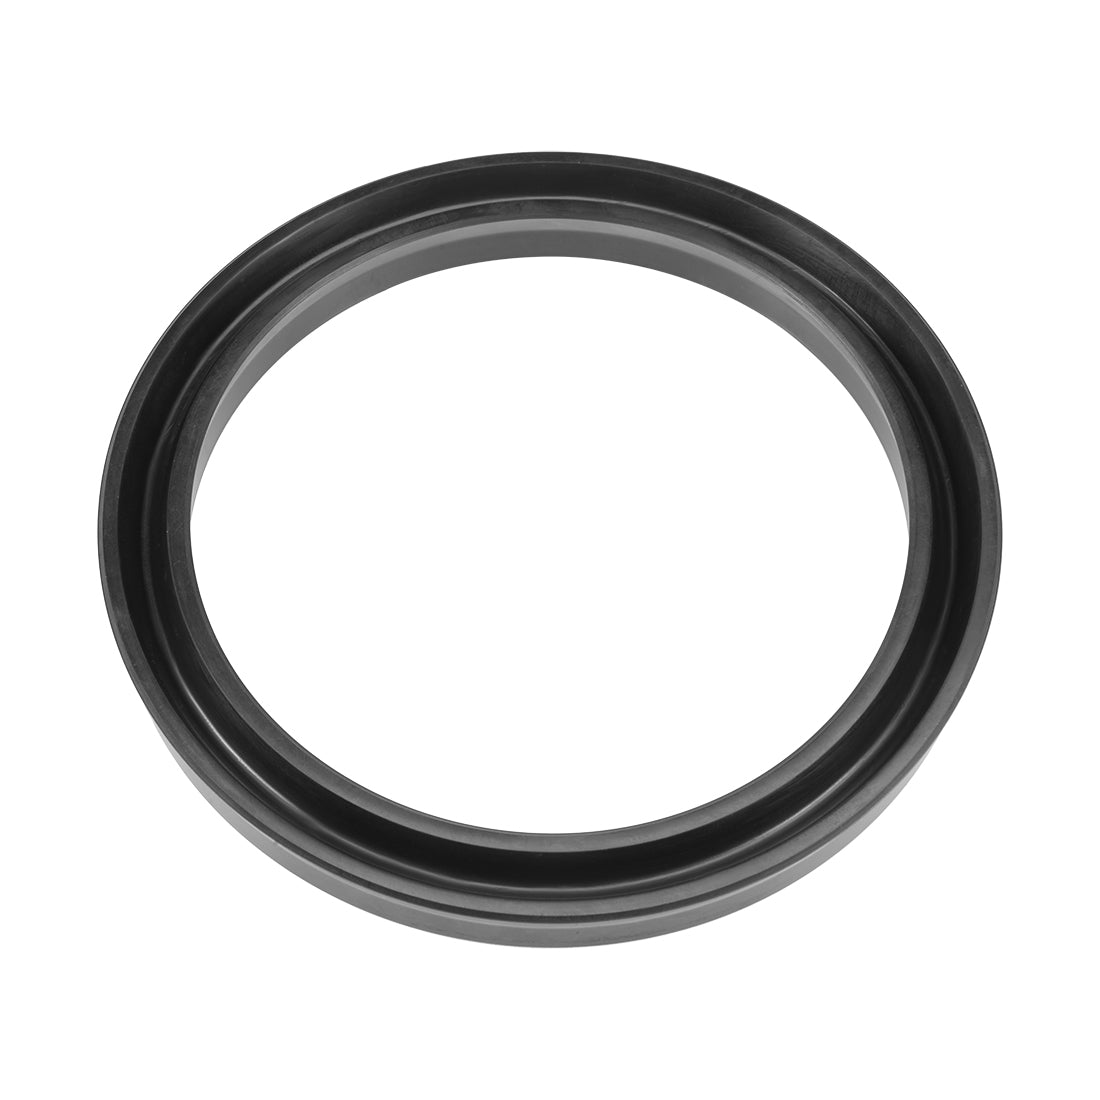 Uxcell Uxcell Hydraulic Seal, Piston Shaft UPH Oil Sealing O-Ring, 65mm x 84.5mm x 12mm